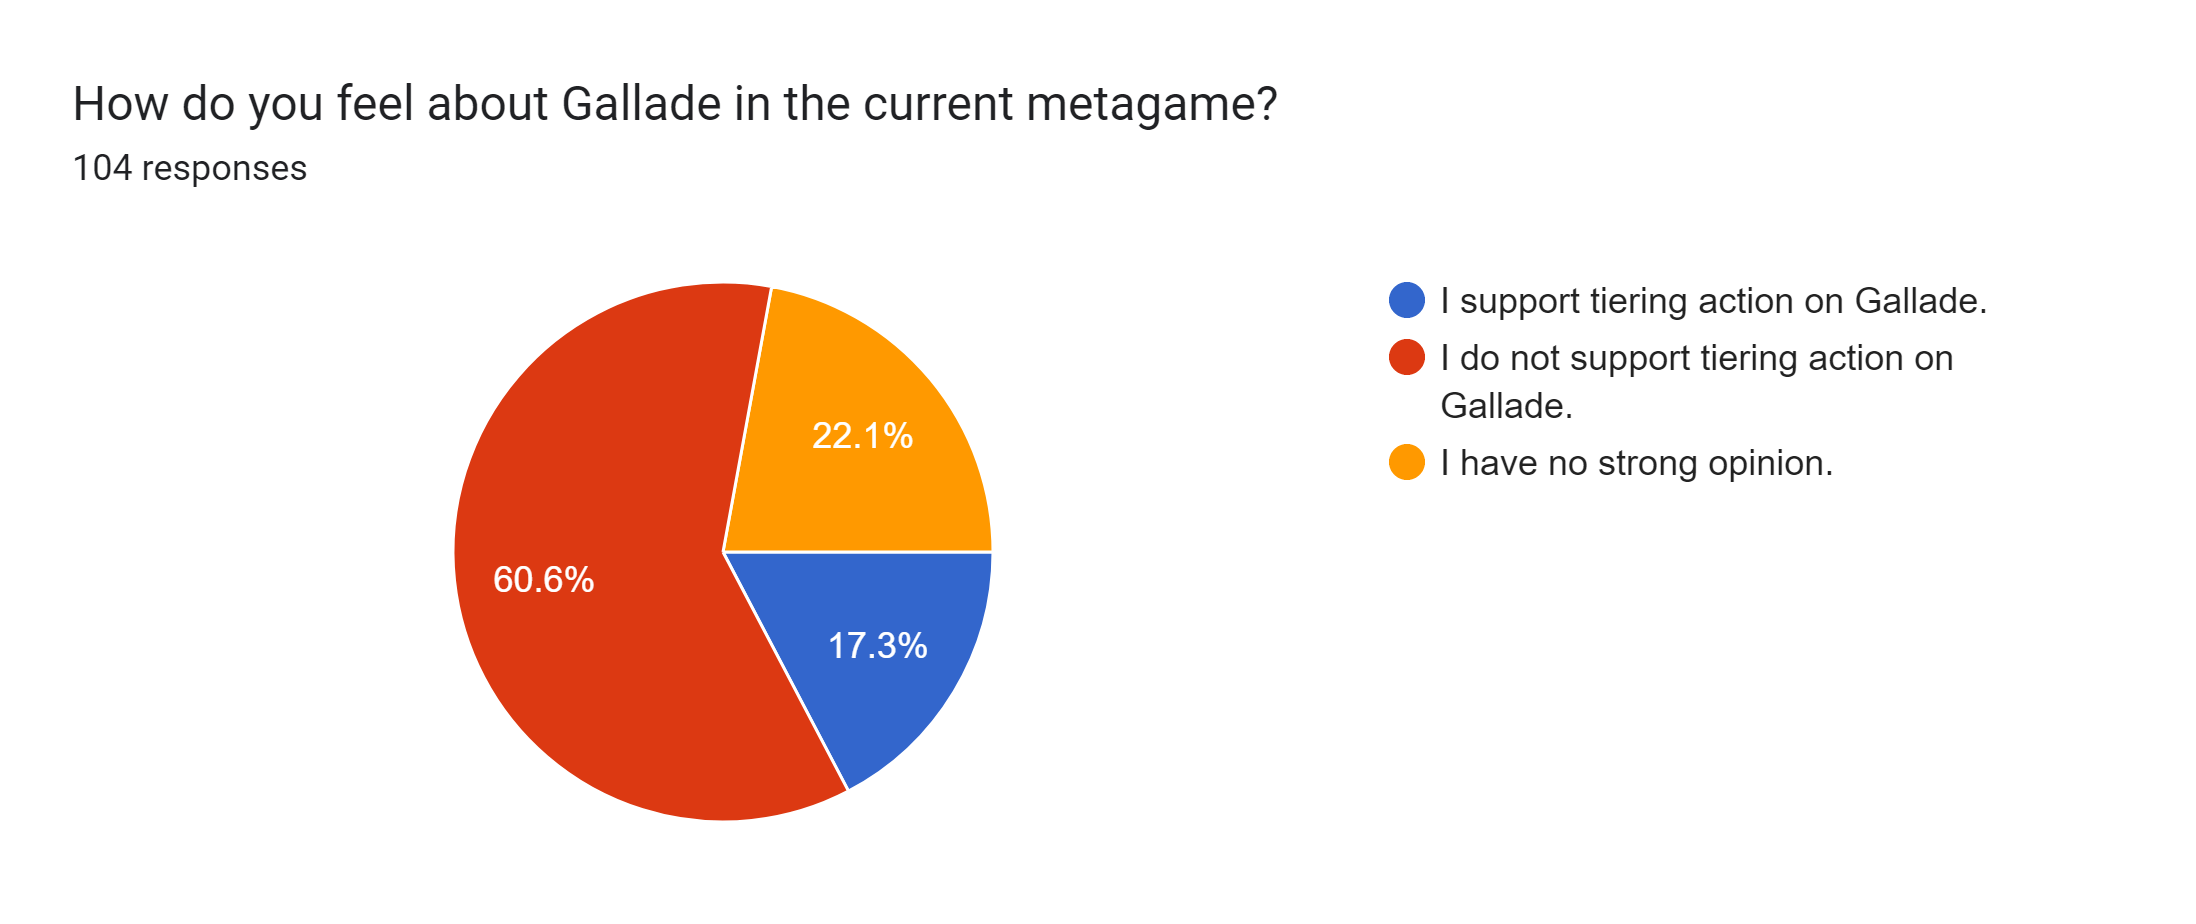 Forms response chart. Question title: How do you feel about Gallade in the current metagame?. Number of responses: 104 responses.